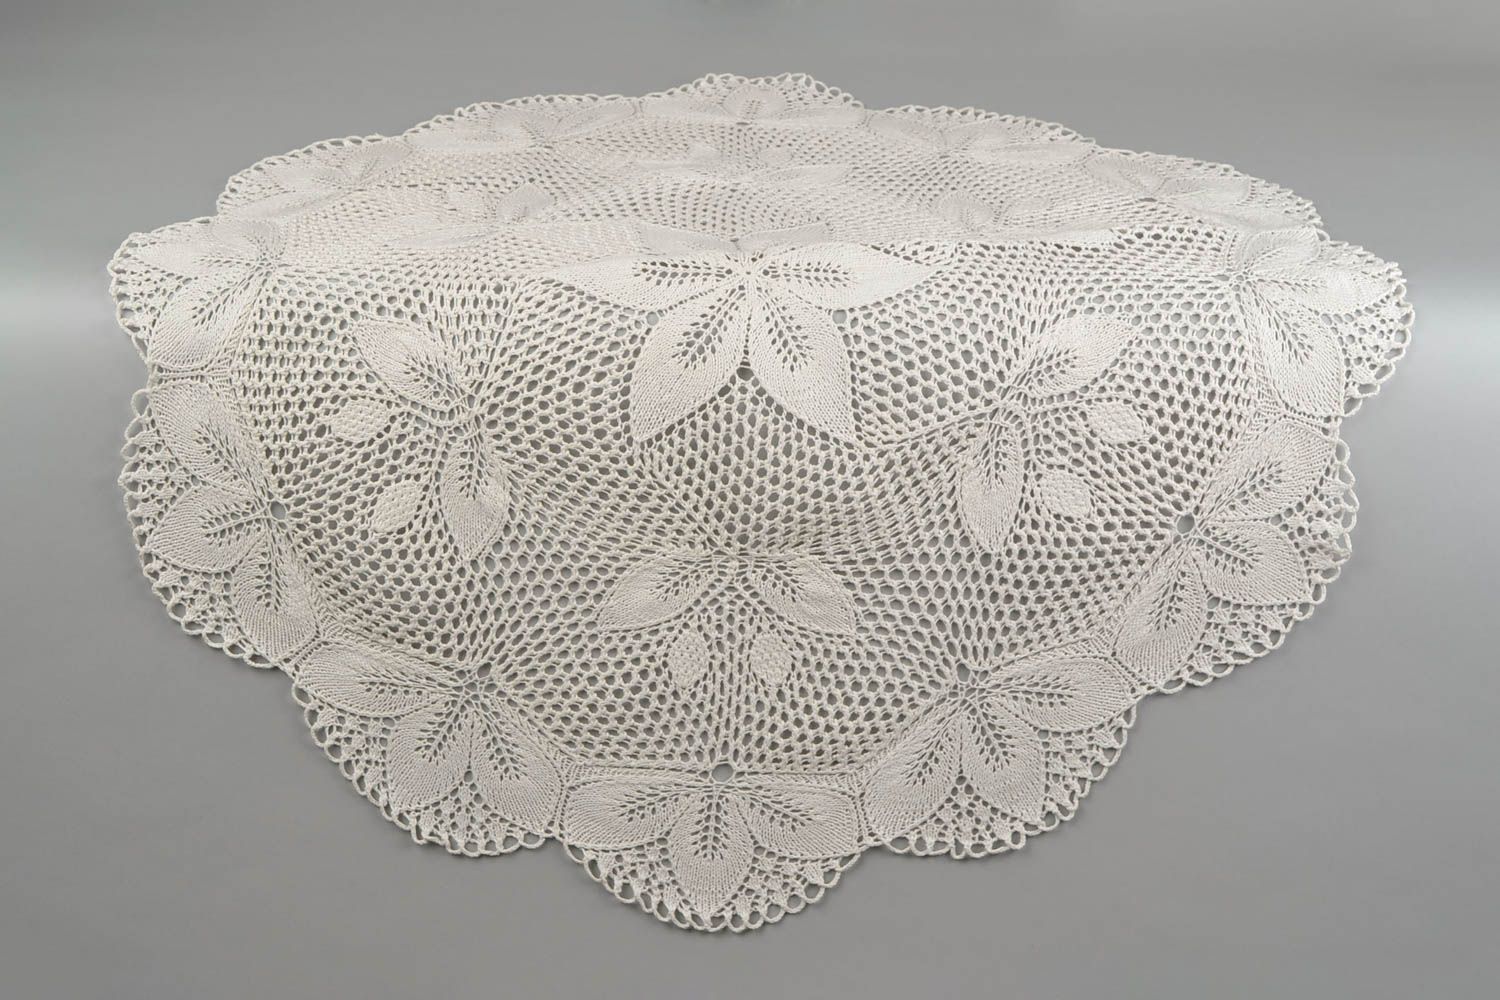 Openwork knitted tablecloth handmade lace napkin vintage style interior decor photo 3